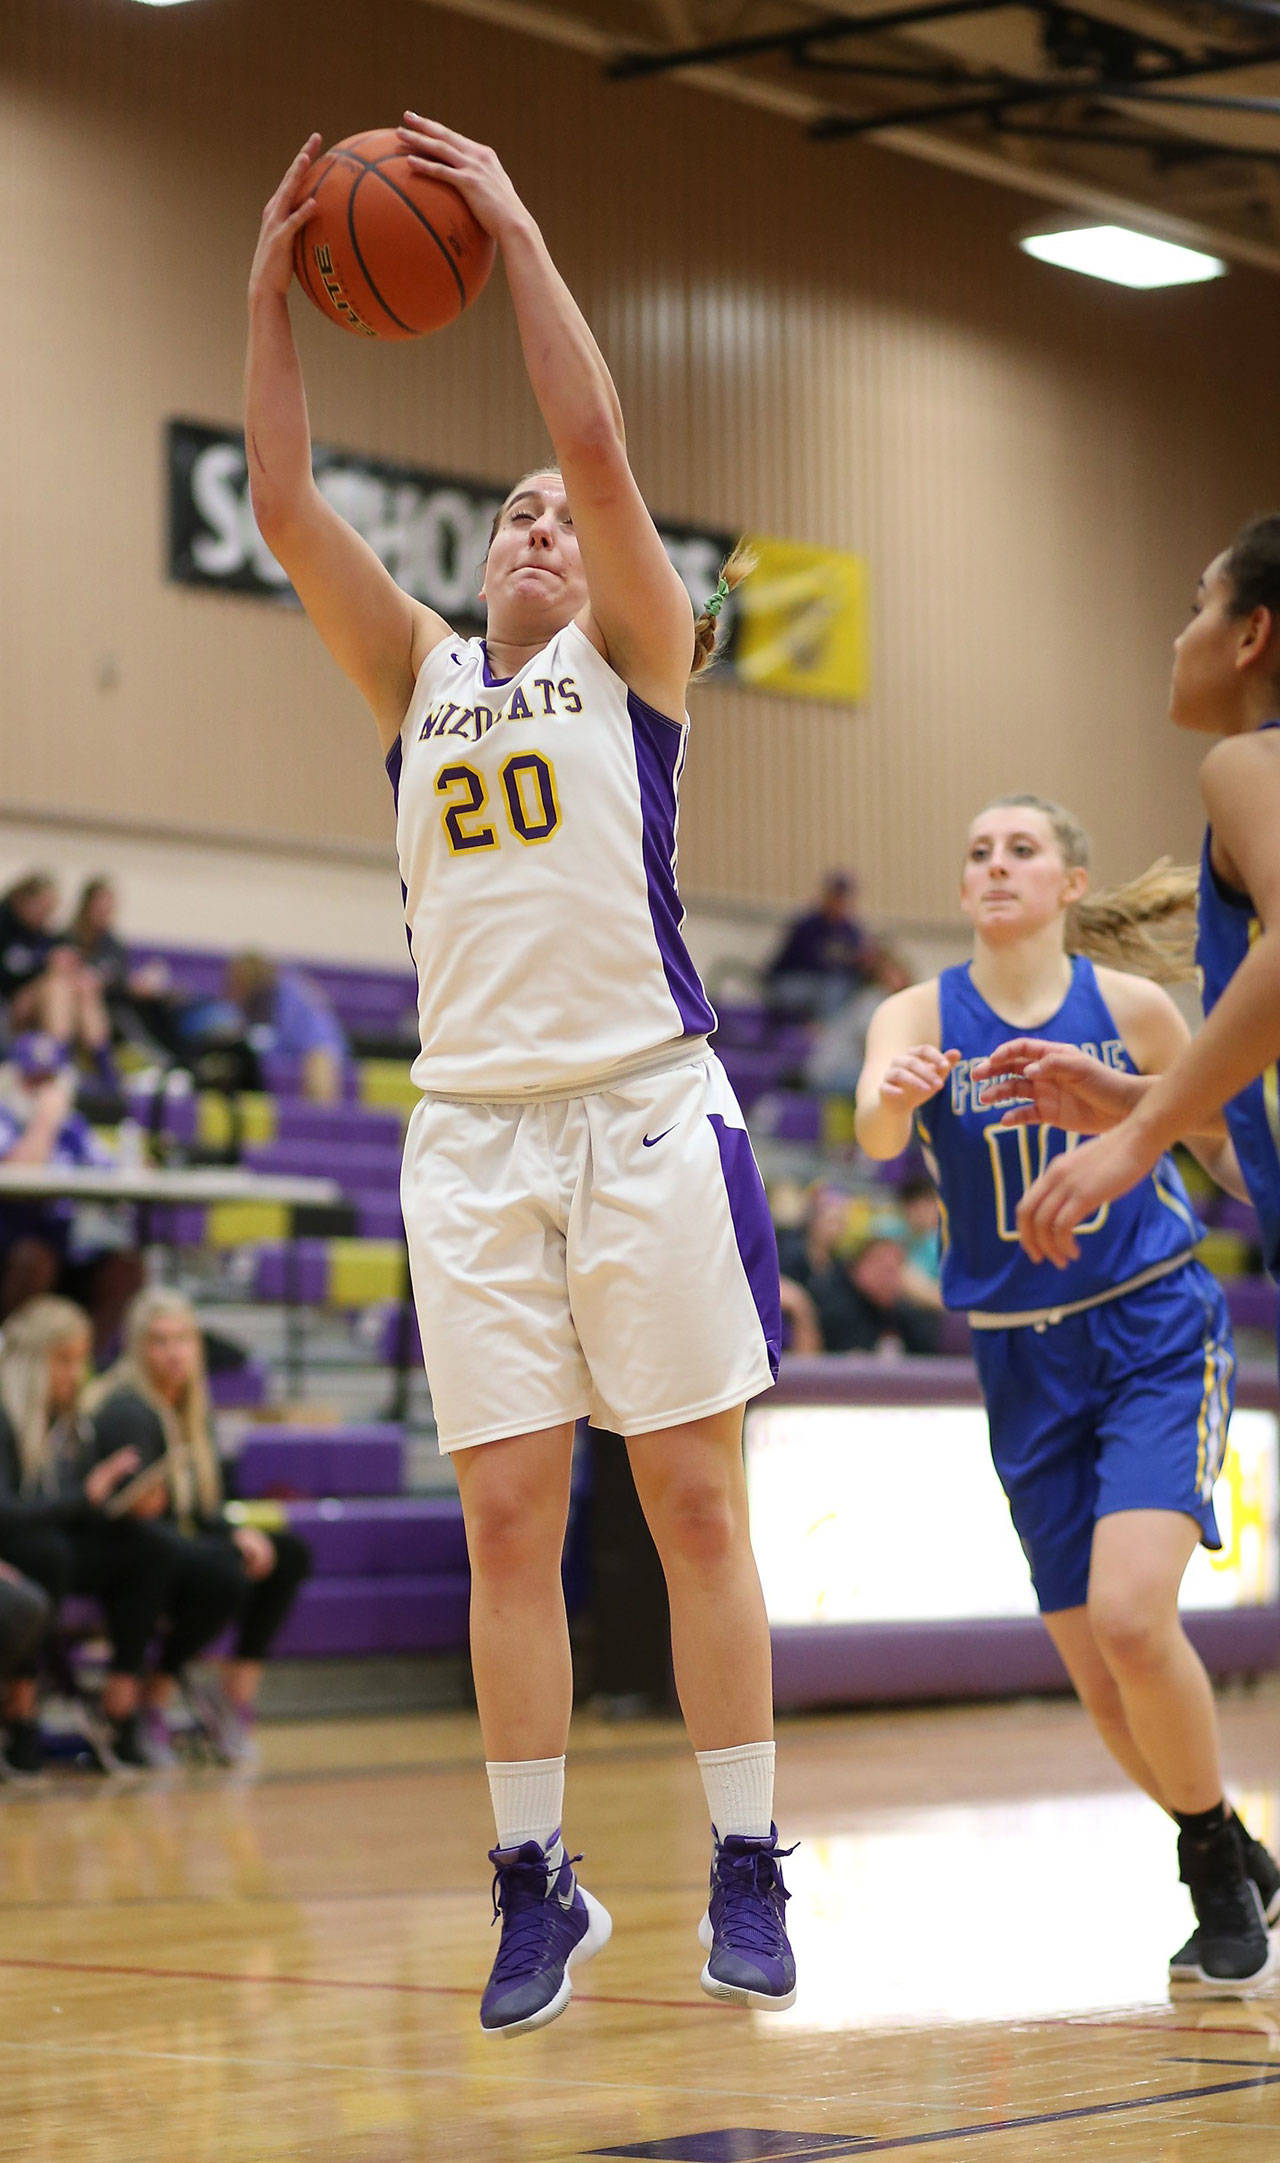 Samantha Hines hauls in a rebound against Ferndale Monday. Earlier this season she tied the school’s single-game rebounding record with 26. (Photo by John Fisken)